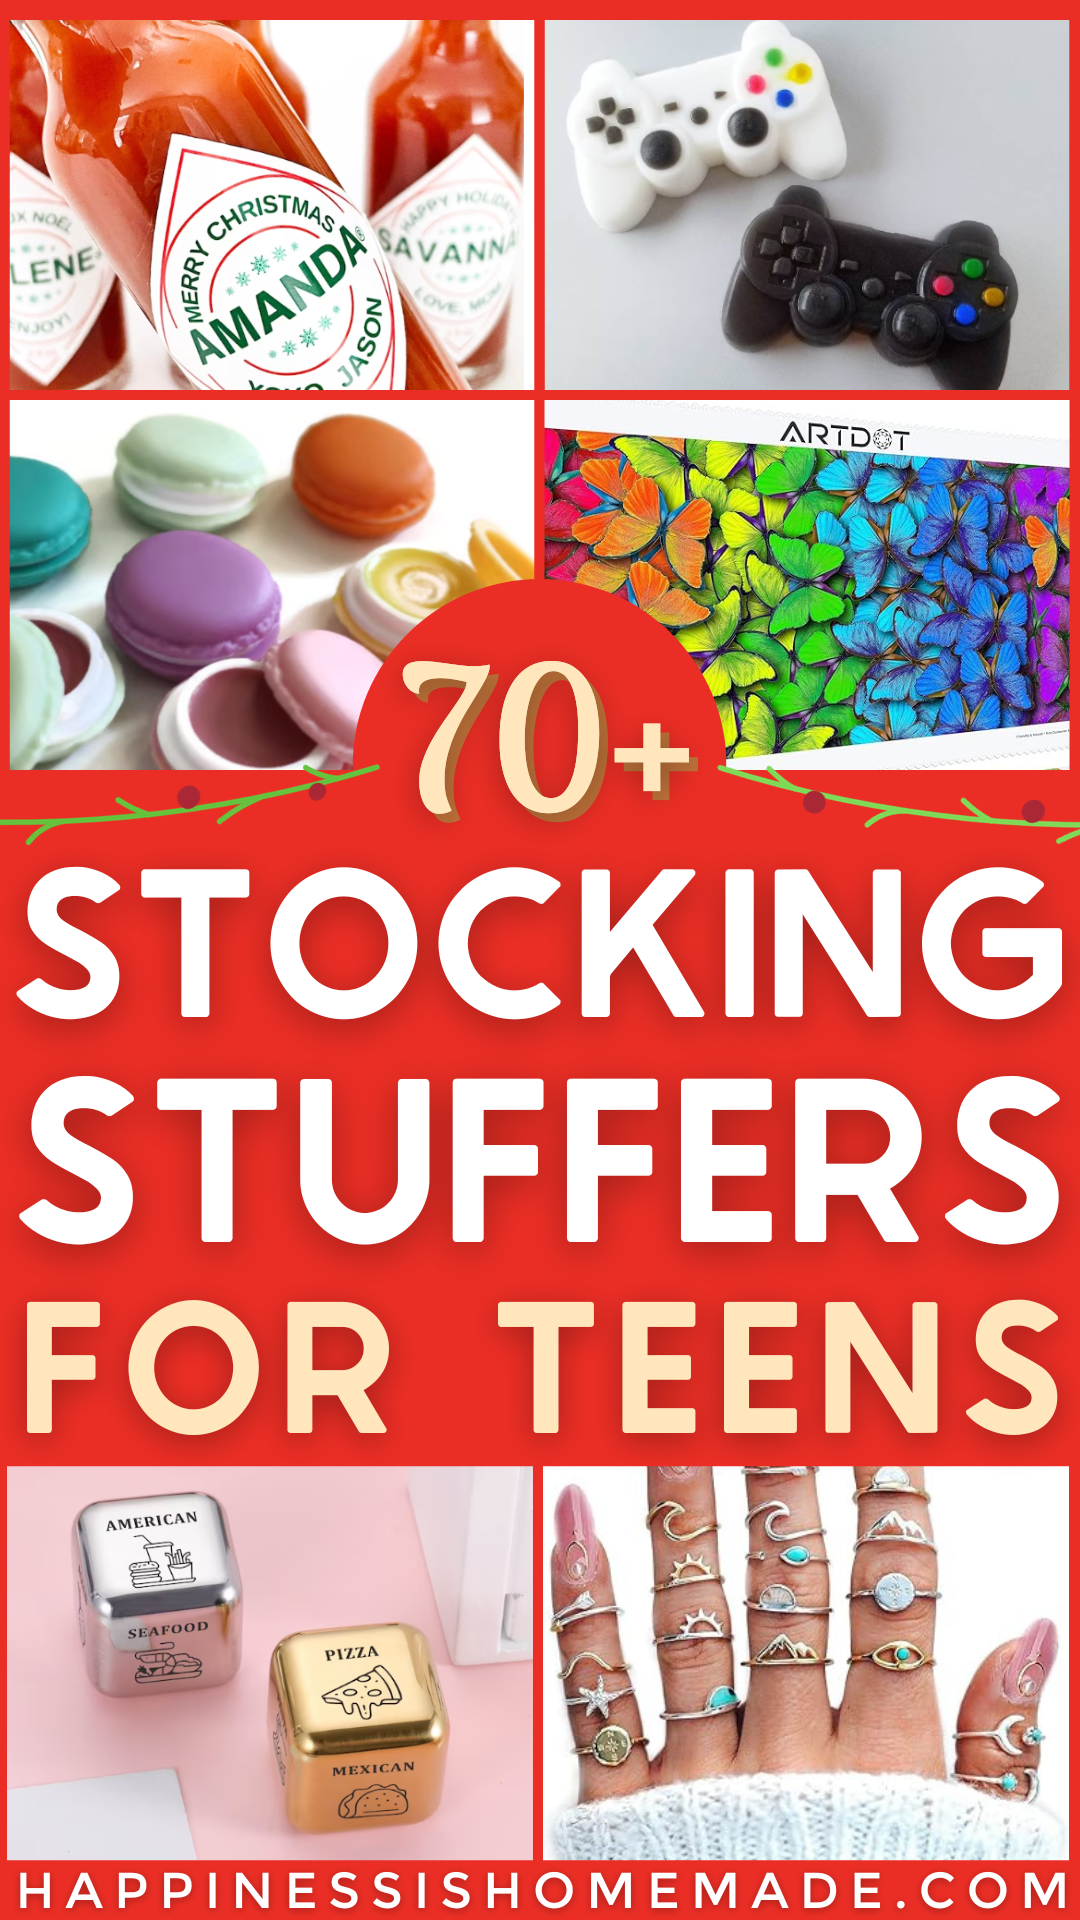 https://www.happinessishomemade.net/wp-content/uploads/2019/10/70-Stocking-Stuffers-for-Teens.png